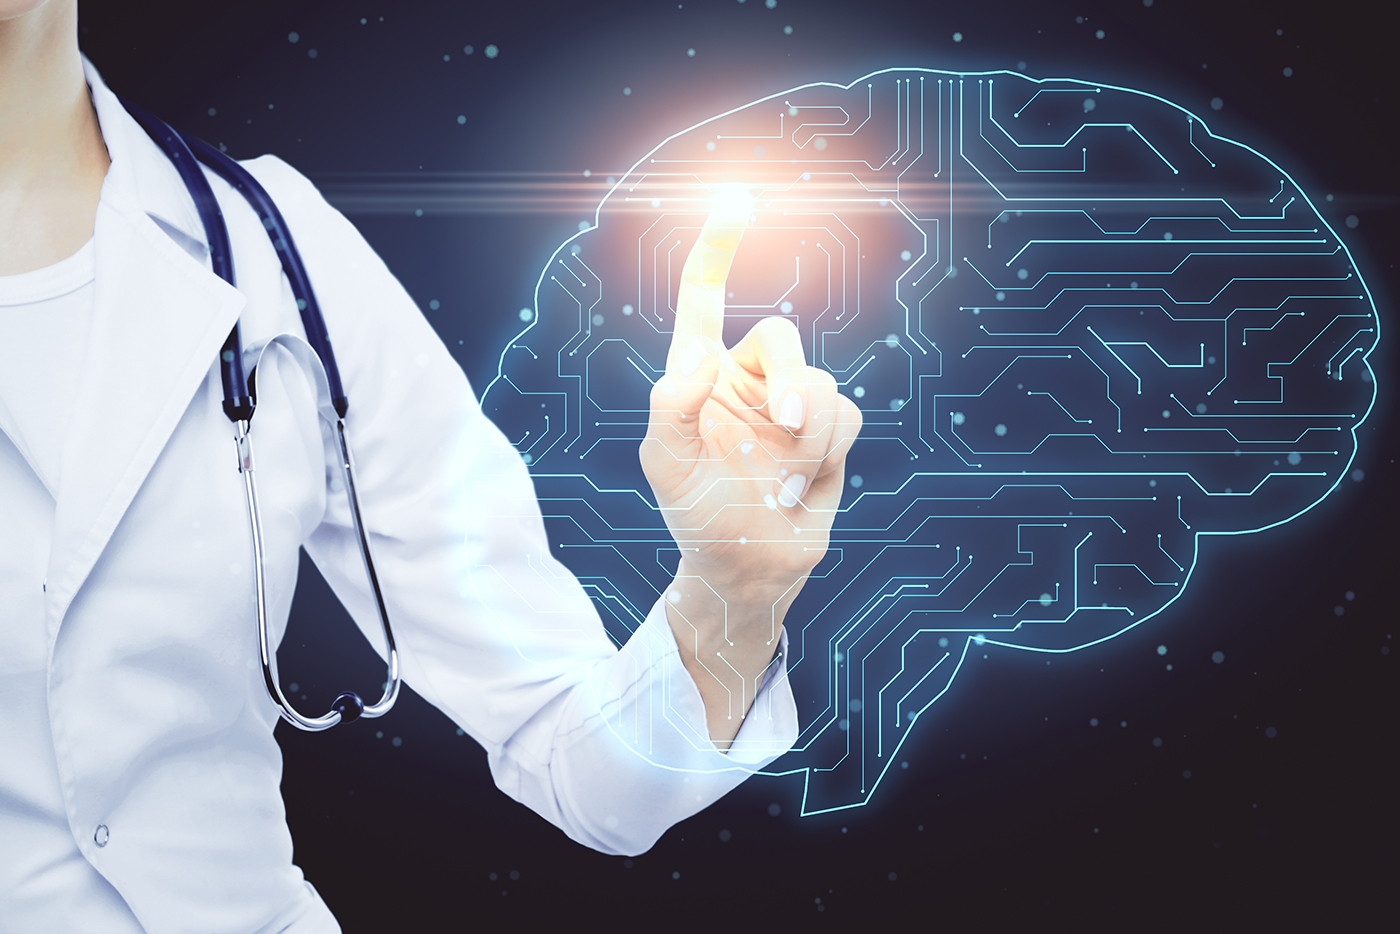 From Diagnosis To Treatment: 10 Ways AI Is Transforming Healthcare | Bernard Marr